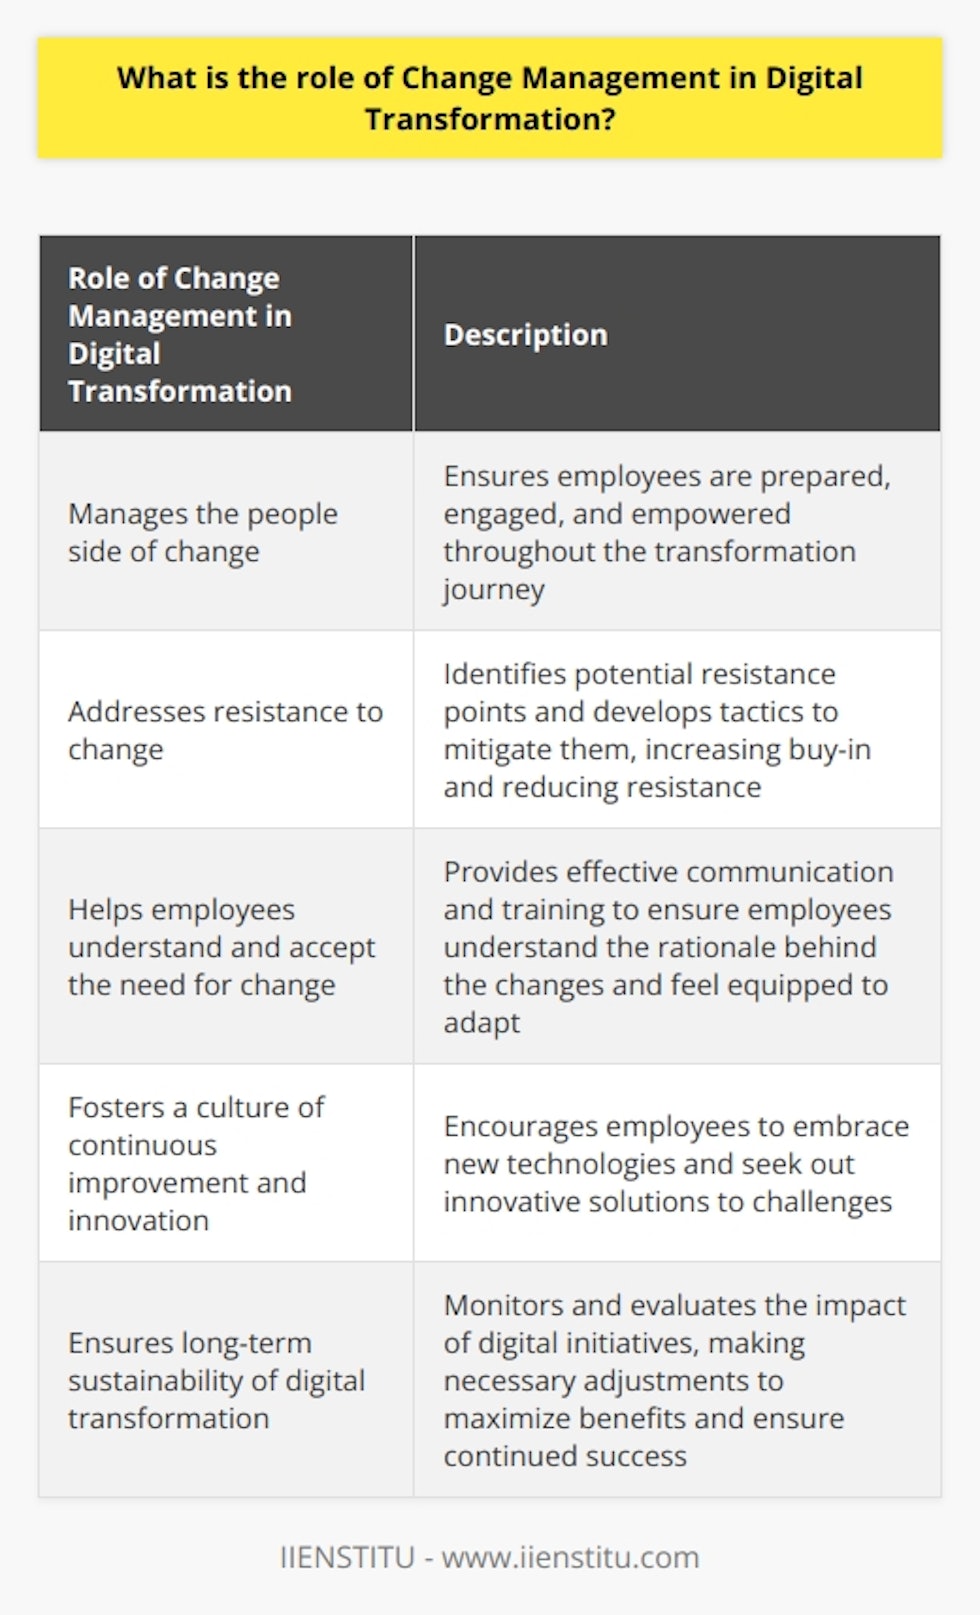 Digital transformation is a process that organizations undergo to leverage digital technologies and strategies to improve their operations, products, and services. However, this process is not without its challenges and requires careful planning and execution to be successful. One of the key aspects of ensuring successful digital transformation is effective change management.Change management plays a crucial role in digital transformation by helping organizations navigate the complexities of implementing new technologies, processes, and systems. It involves managing the people side of change to ensure that employees are prepared, engaged, and empowered throughout the transformation journey.One of the primary reasons change management is essential in digital transformation is because it helps address resistance to change. Implementing new technologies and processes often disrupts established ways of doing things, which can lead to resistance from employees. Change management strategies help identify potential resistance points and develop tactics to mitigate them. By involving employees in the planning and decision-making process, organizations can increase buy-in and reduce resistance.Additionally, change management helps employees understand and accept the need for change. Digital transformation often brings significant shifts in job roles, responsibilities, and workflows. Effective communication and training are crucial in ensuring that employees understand the rationale behind the changes and feel equipped to adapt. Change management strategies provide the necessary support and resources, such as training programs and job aids, to help employees navigate the transition smoothly.Furthermore, change management fosters a culture of continuous improvement and innovation. Digital transformation is not a one-time event but an ongoing process of adapting to evolving technologies and market dynamics. Change management strategies encourage employees to embrace new technologies and seek out innovative solutions to challenges. By creating a culture that values and supports change, organizations can sustain their digital transformation efforts and remain agile in the face of future disruptions.Lastly, change management ensures the long-term sustainability of digital transformation. It helps organizations monitor and evaluate the impact of their digital initiatives and make necessary adjustments. By regularly assessing the outcomes and addressing any gaps or challenges, organizations can maximize the benefits of digital transformation and ensure its continued success.In summary, change management is a vital component of digital transformation. It helps organizations effectively navigate the complexities of implementing new technologies and processes, address resistance to change, and ensure employees are prepared and engaged throughout the transformation journey. By fostering a culture of continuous improvement and innovation, change management enables organizations to sustain their digital transformation efforts and achieve long-term success.